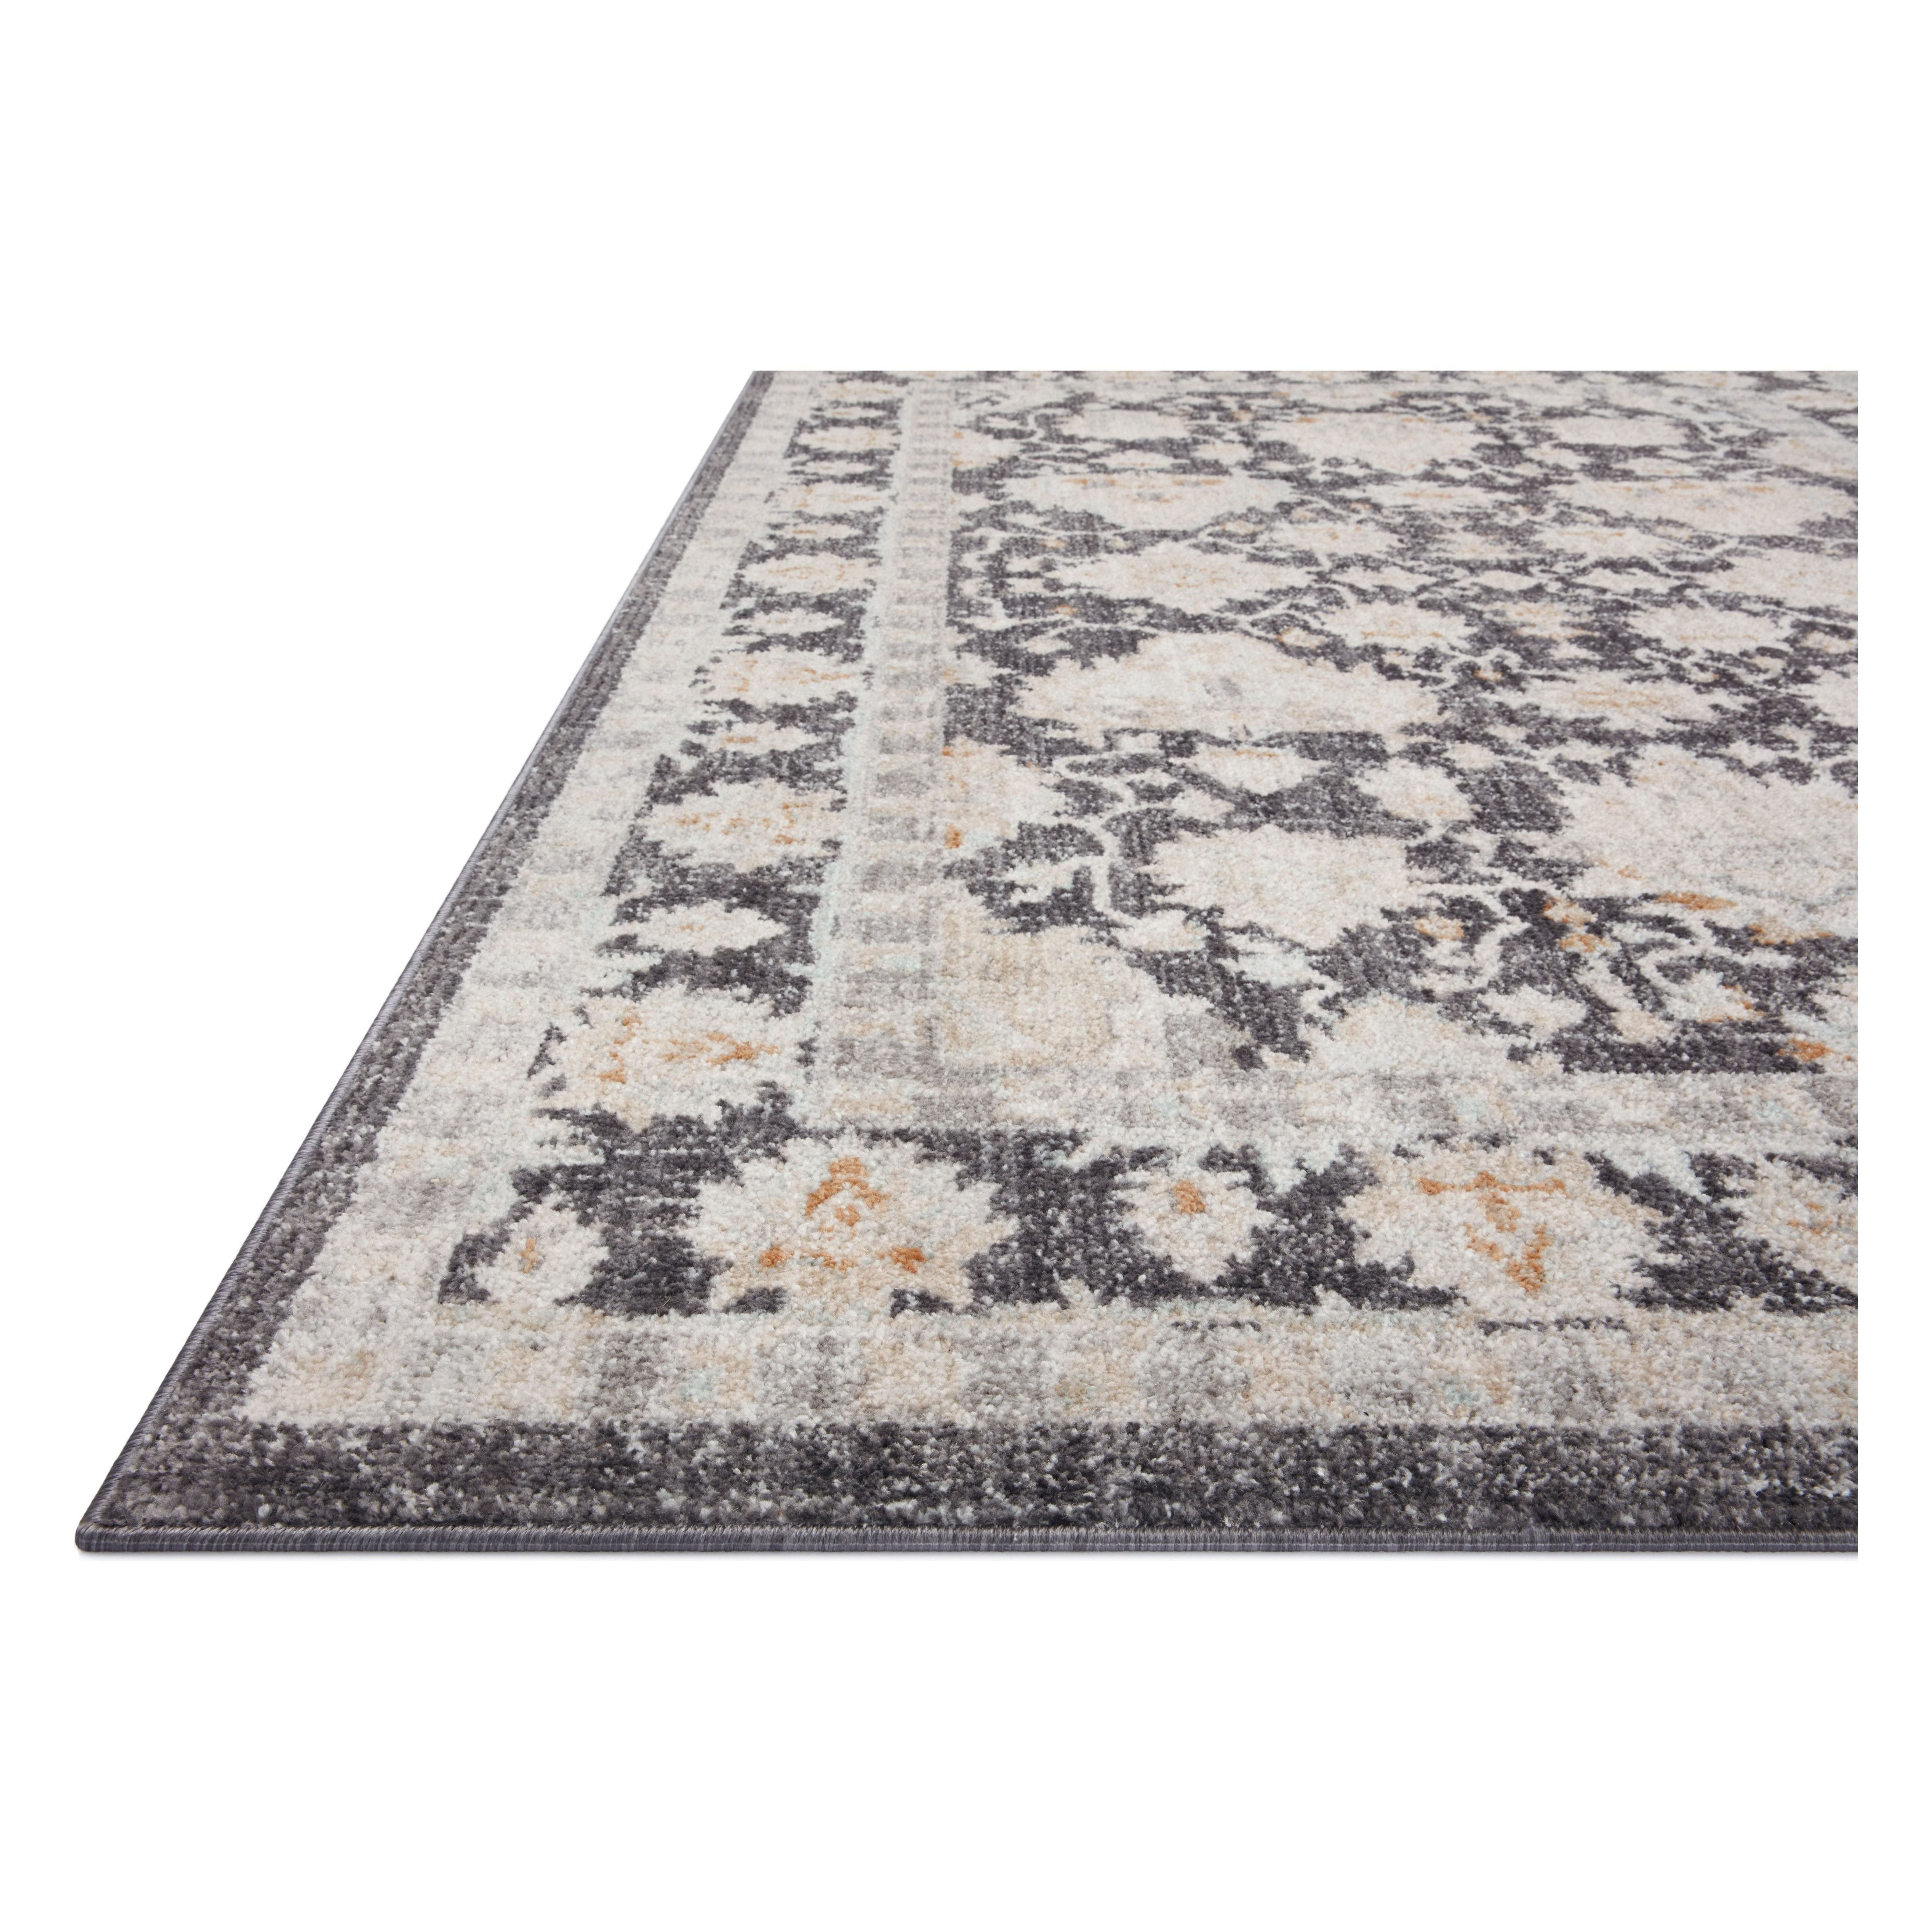 Inspired by antique Turkish Oushak carpets with large-scale motifs, the Monroe Charcoal / Natural Rug modernizes the traditional design in neutral palettes, many of which have black details that anchor the rug in the room. Monroe is power-loomed of 100% polypropylene for easy care and reliable durability. Amethyst Home provides interior design, new construction, custom furniture, and area rugs in the Salt Lake City metro area.